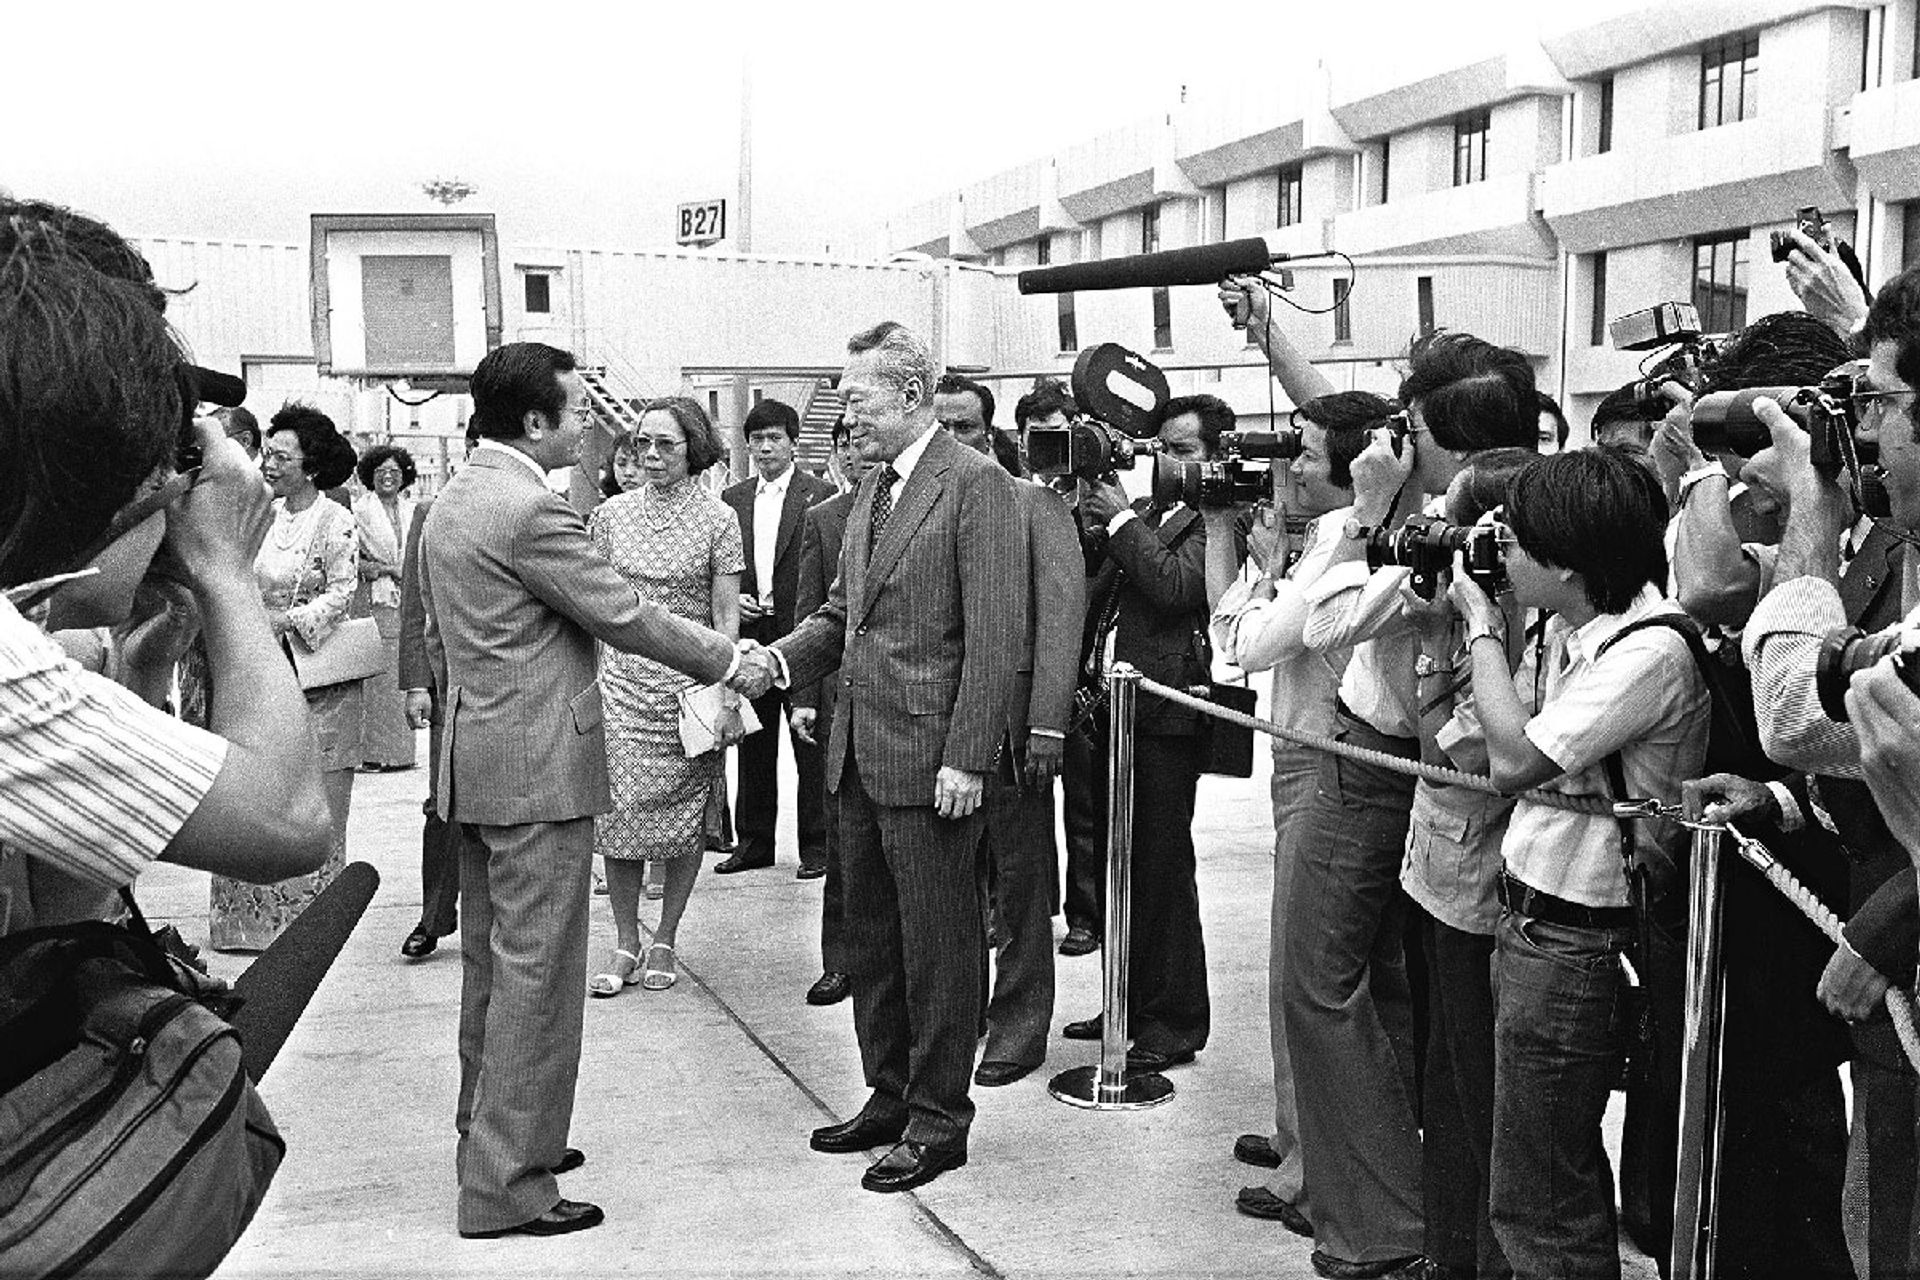 Malaysian Prime Minister Mahathir Mohamad thanking Mr Lee at Paya Lebar Airport after his first official visit to Singapore in 1981. ST Photo: Wan Seng Yip